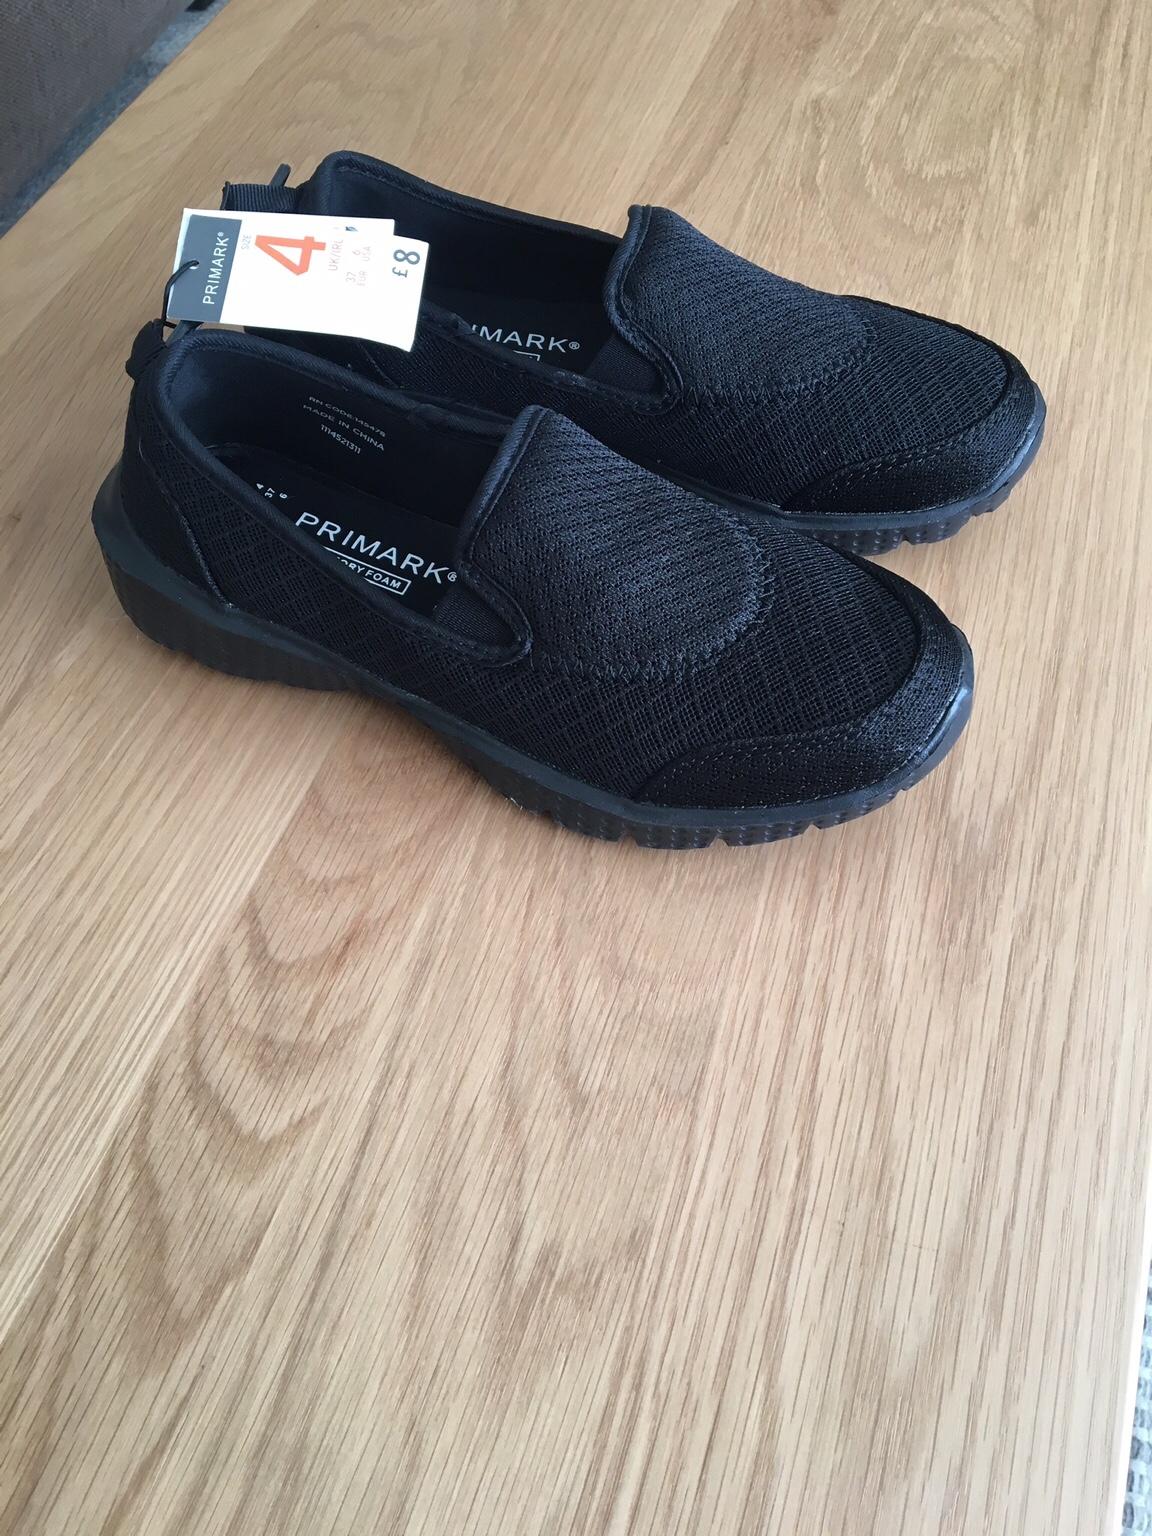 Primark memory foam trainers in Epsom and Ewell for £5.00 for sale | Shpock